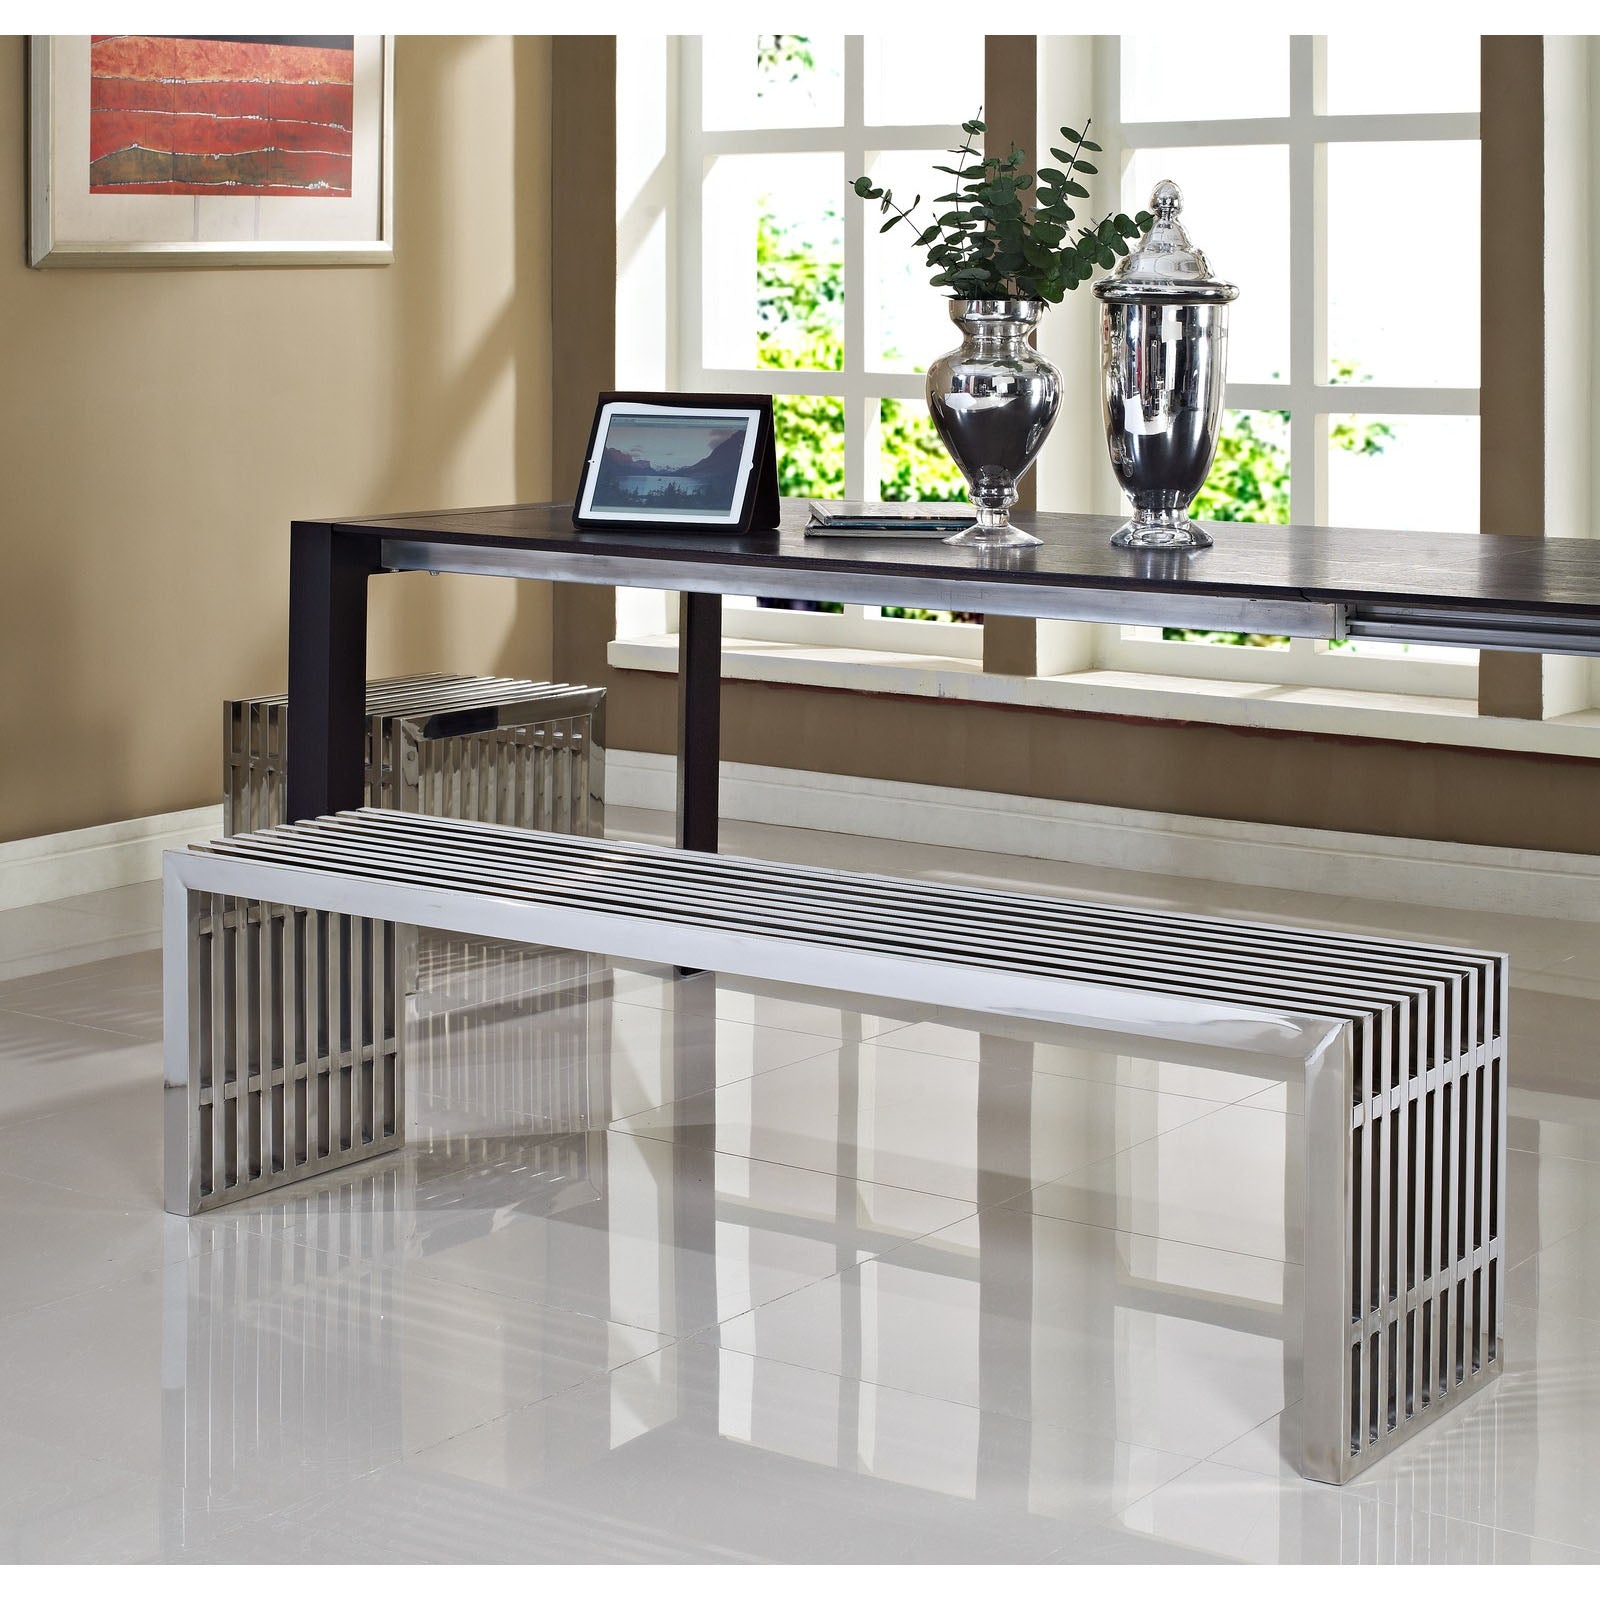 Gridiron Benches Set of 2 - East Shore Modern Home Furnishings